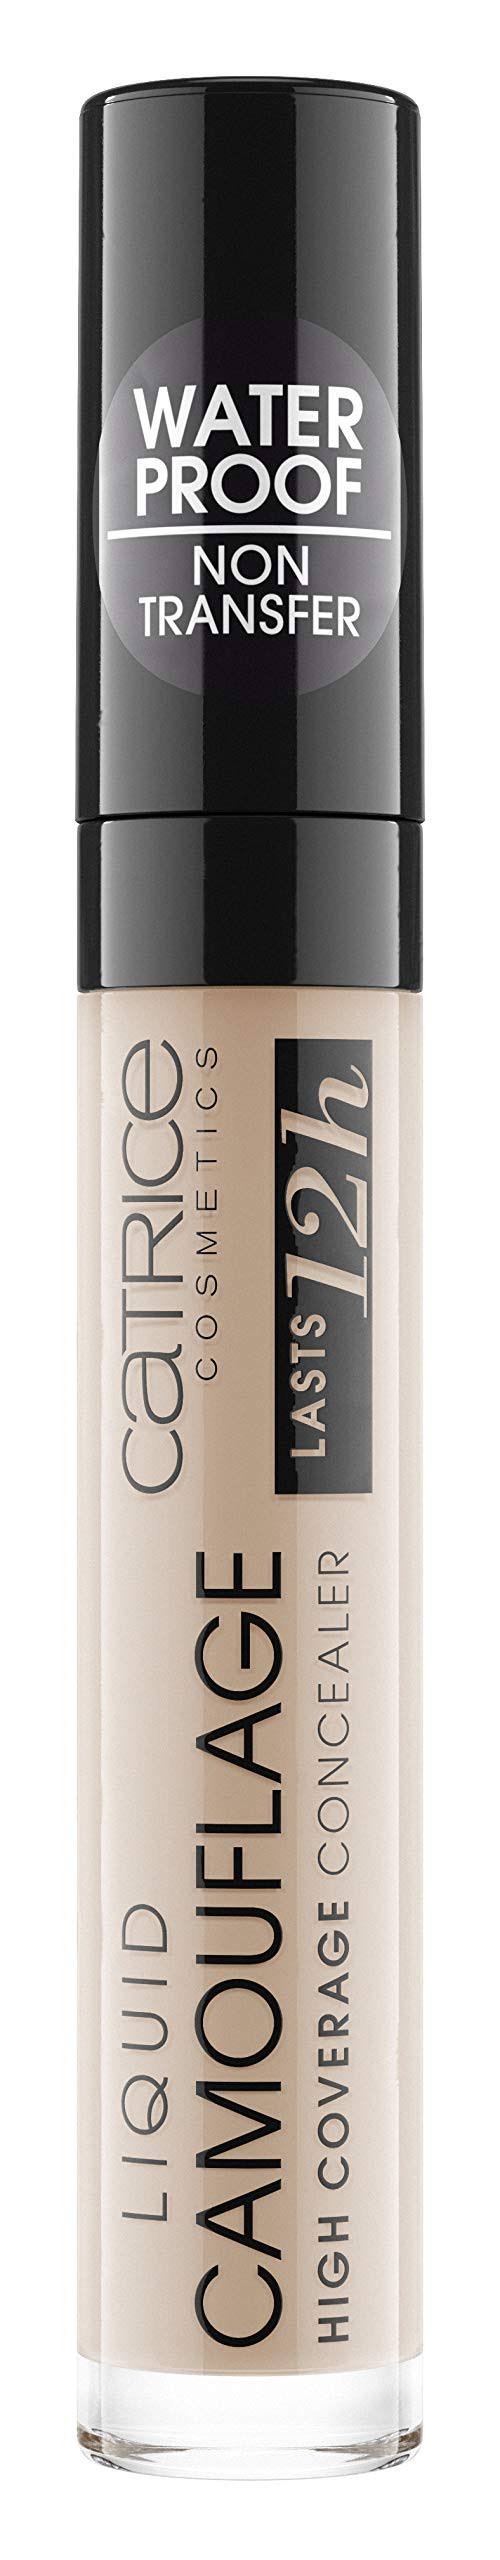 Catrice Liquid Camouflage High Coverage Concealer - 010 Porcelain